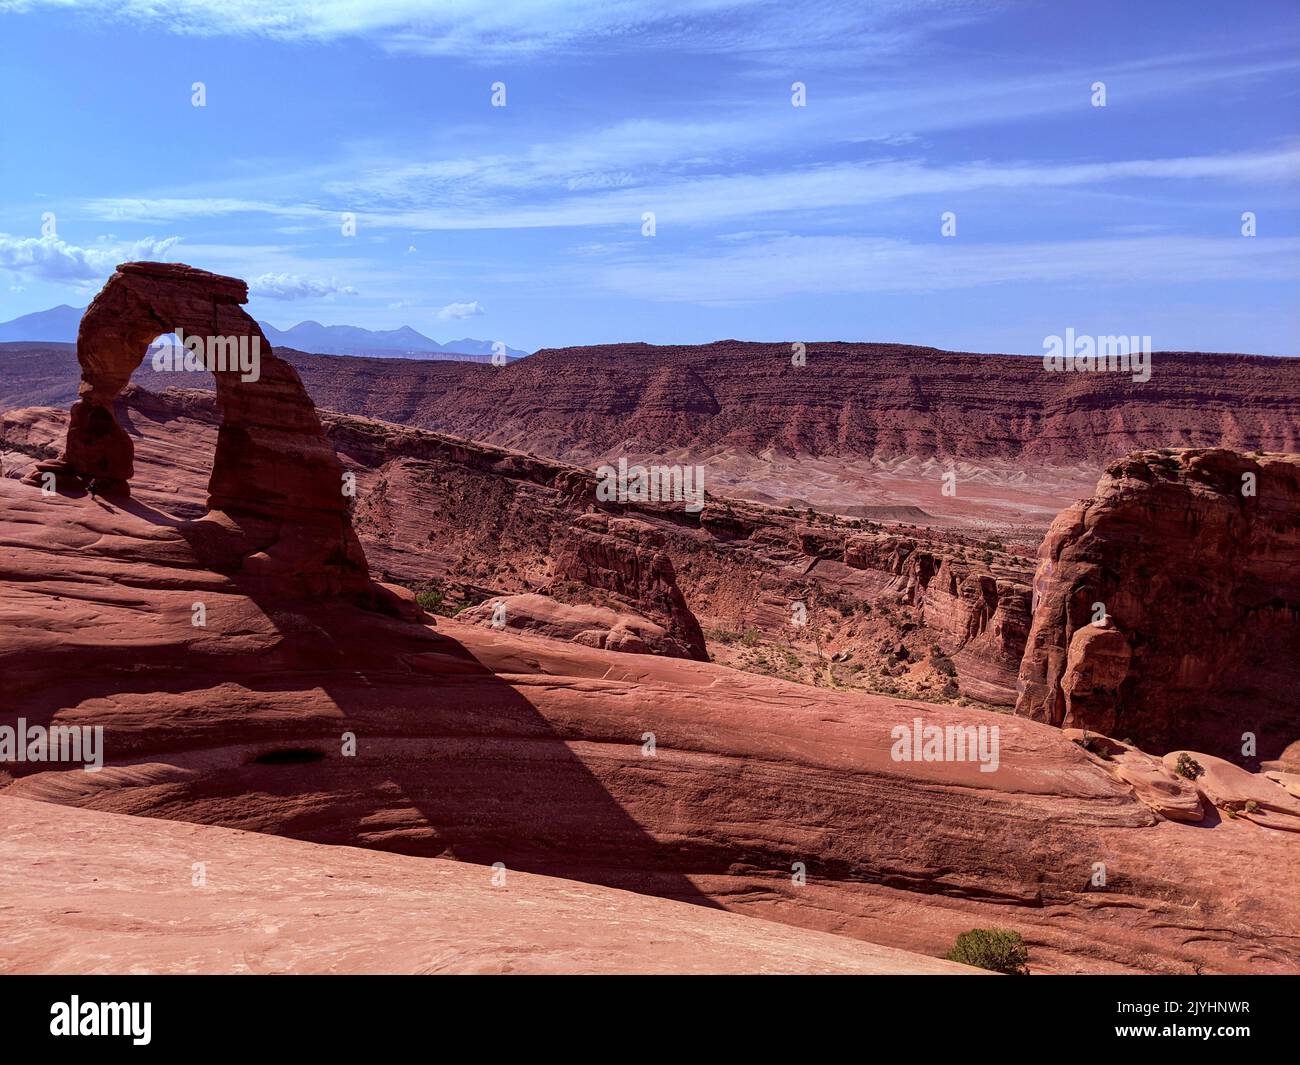 A view of Delicate Arch located in Arches National Park just outside of Moab, Utah Stock Photo